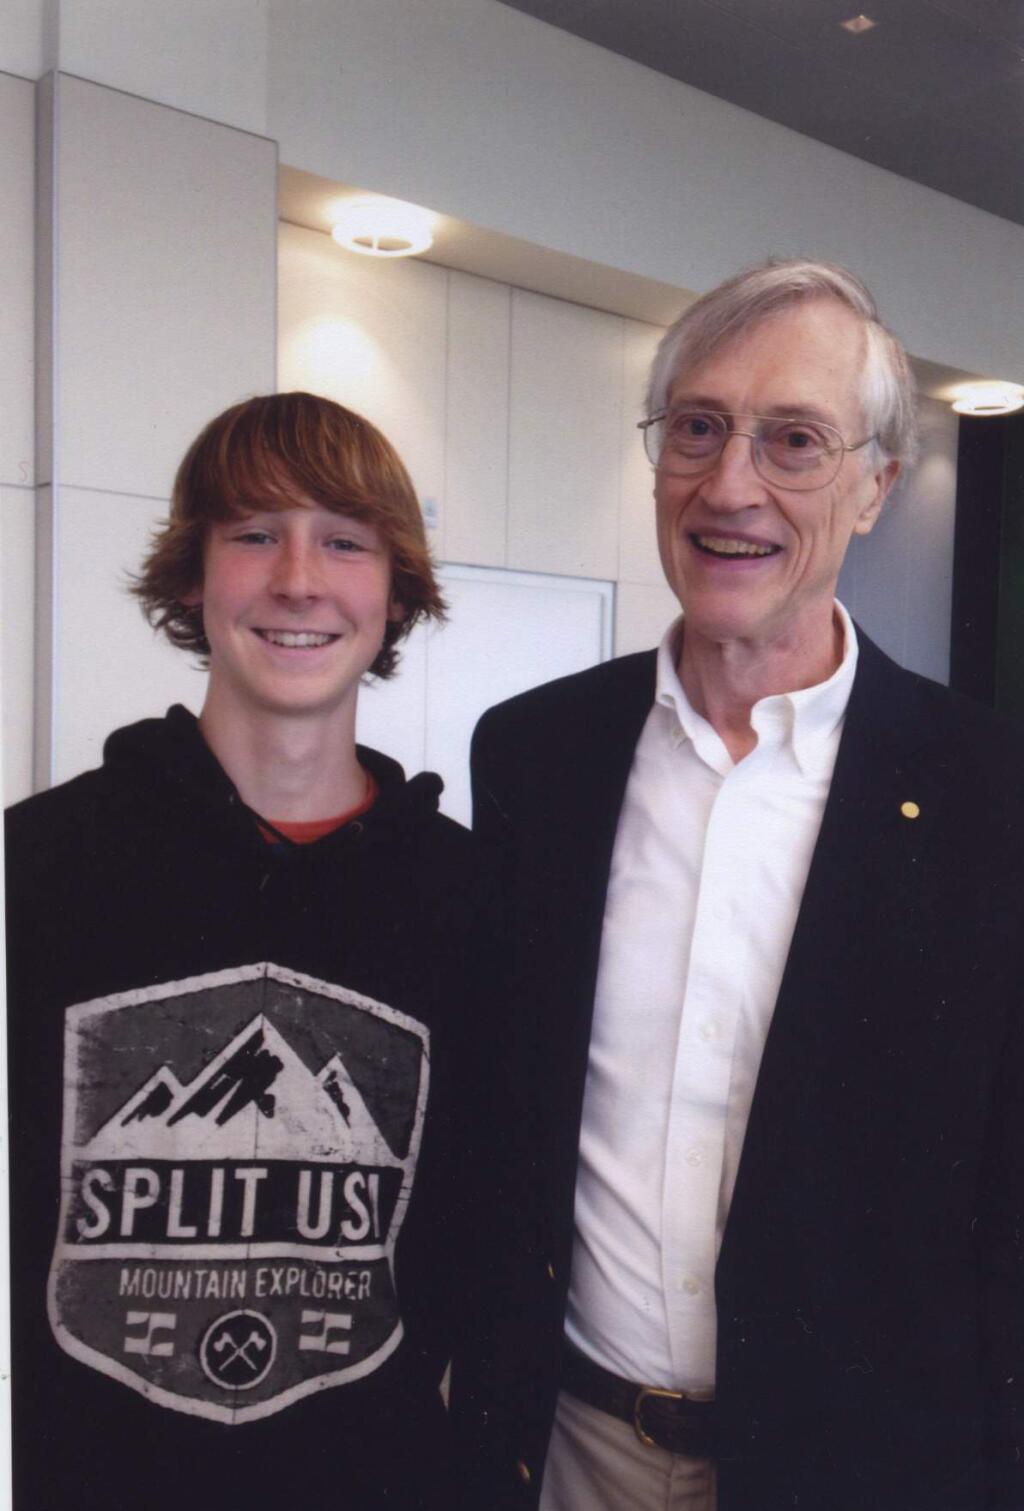 PHOTO: 1 by Baxter family photoMontgomery High School sophomore Leif Baxter is shown with Nobel Prize Winner John C. Mather in Boston.